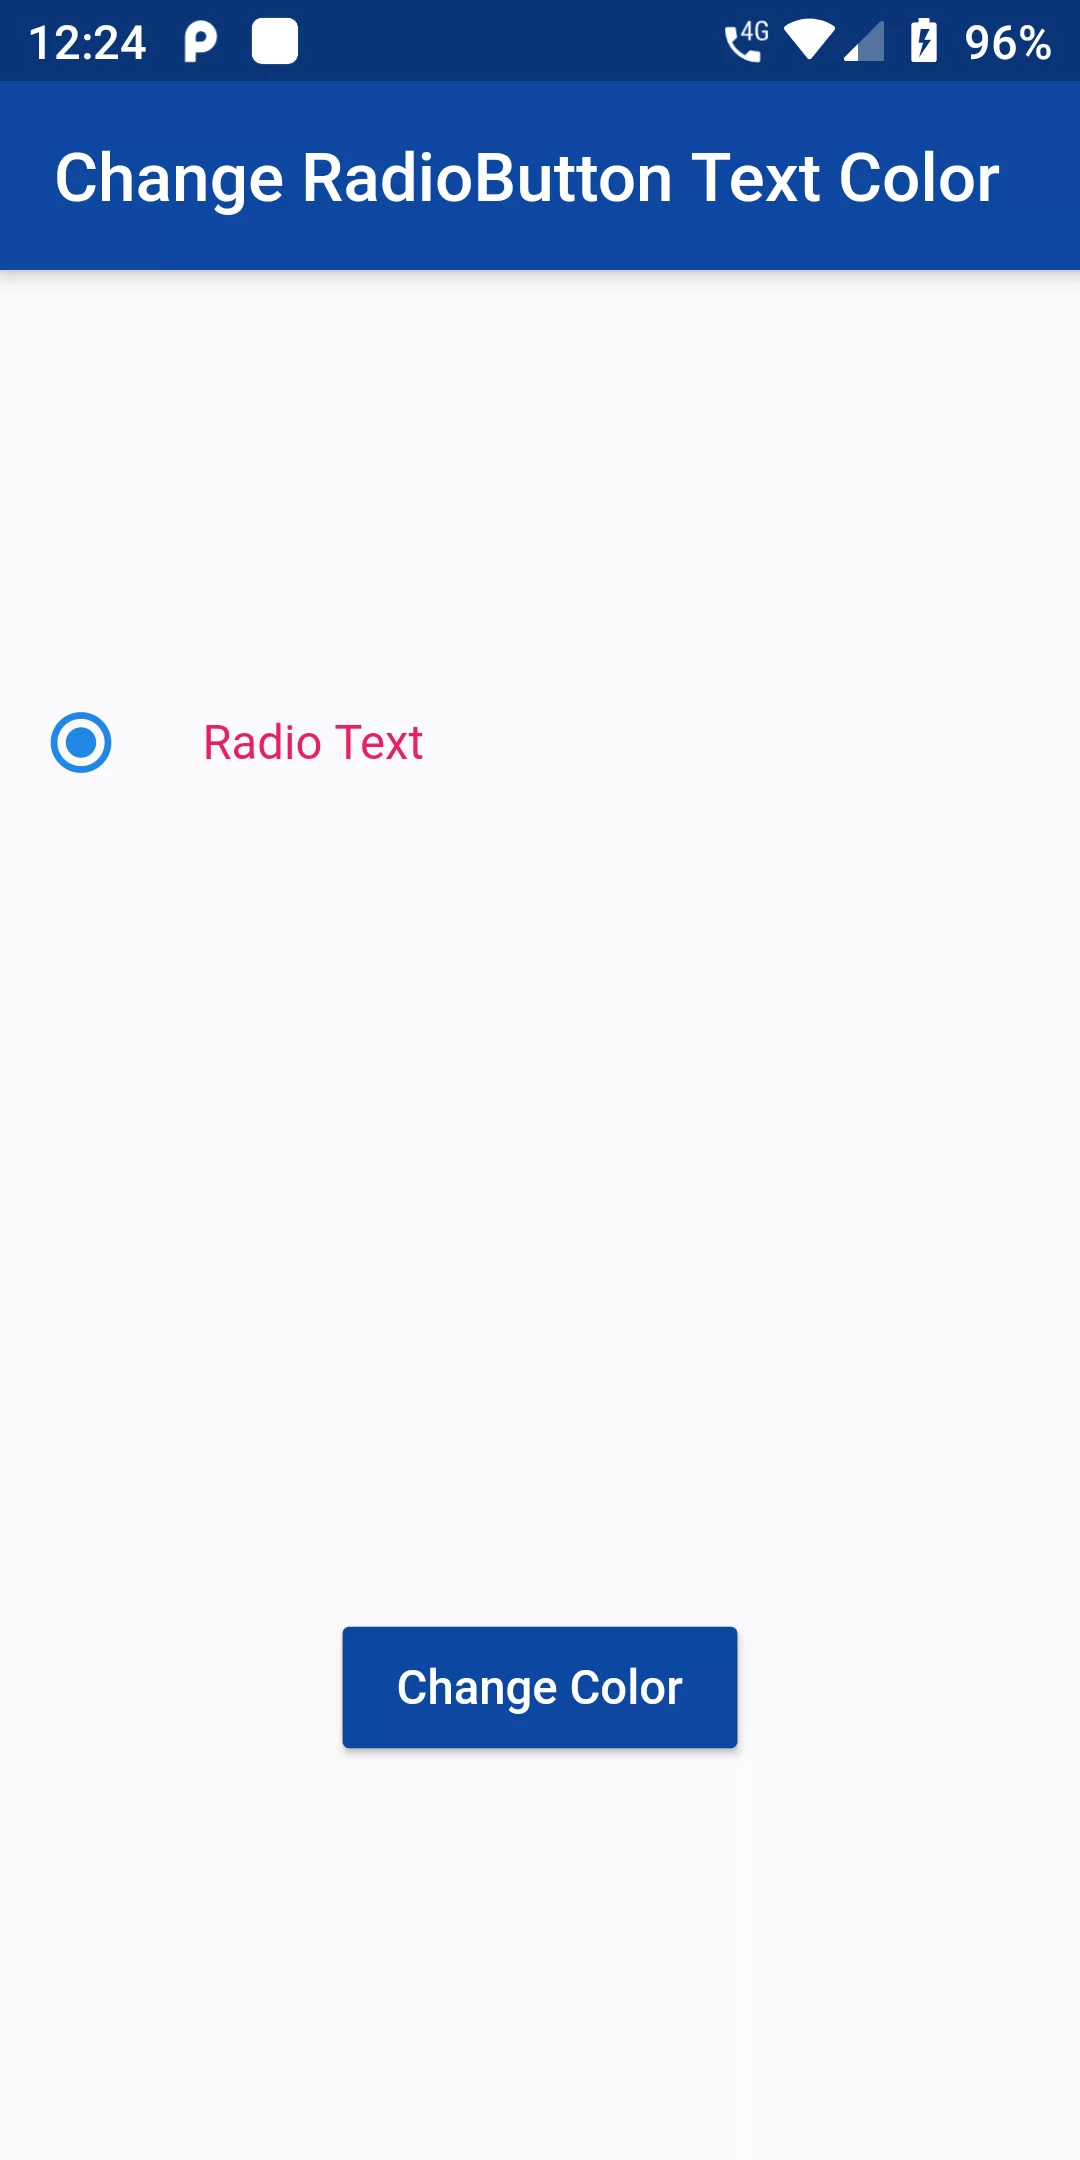 How To Change Radio Button Text Color Using Flutter App